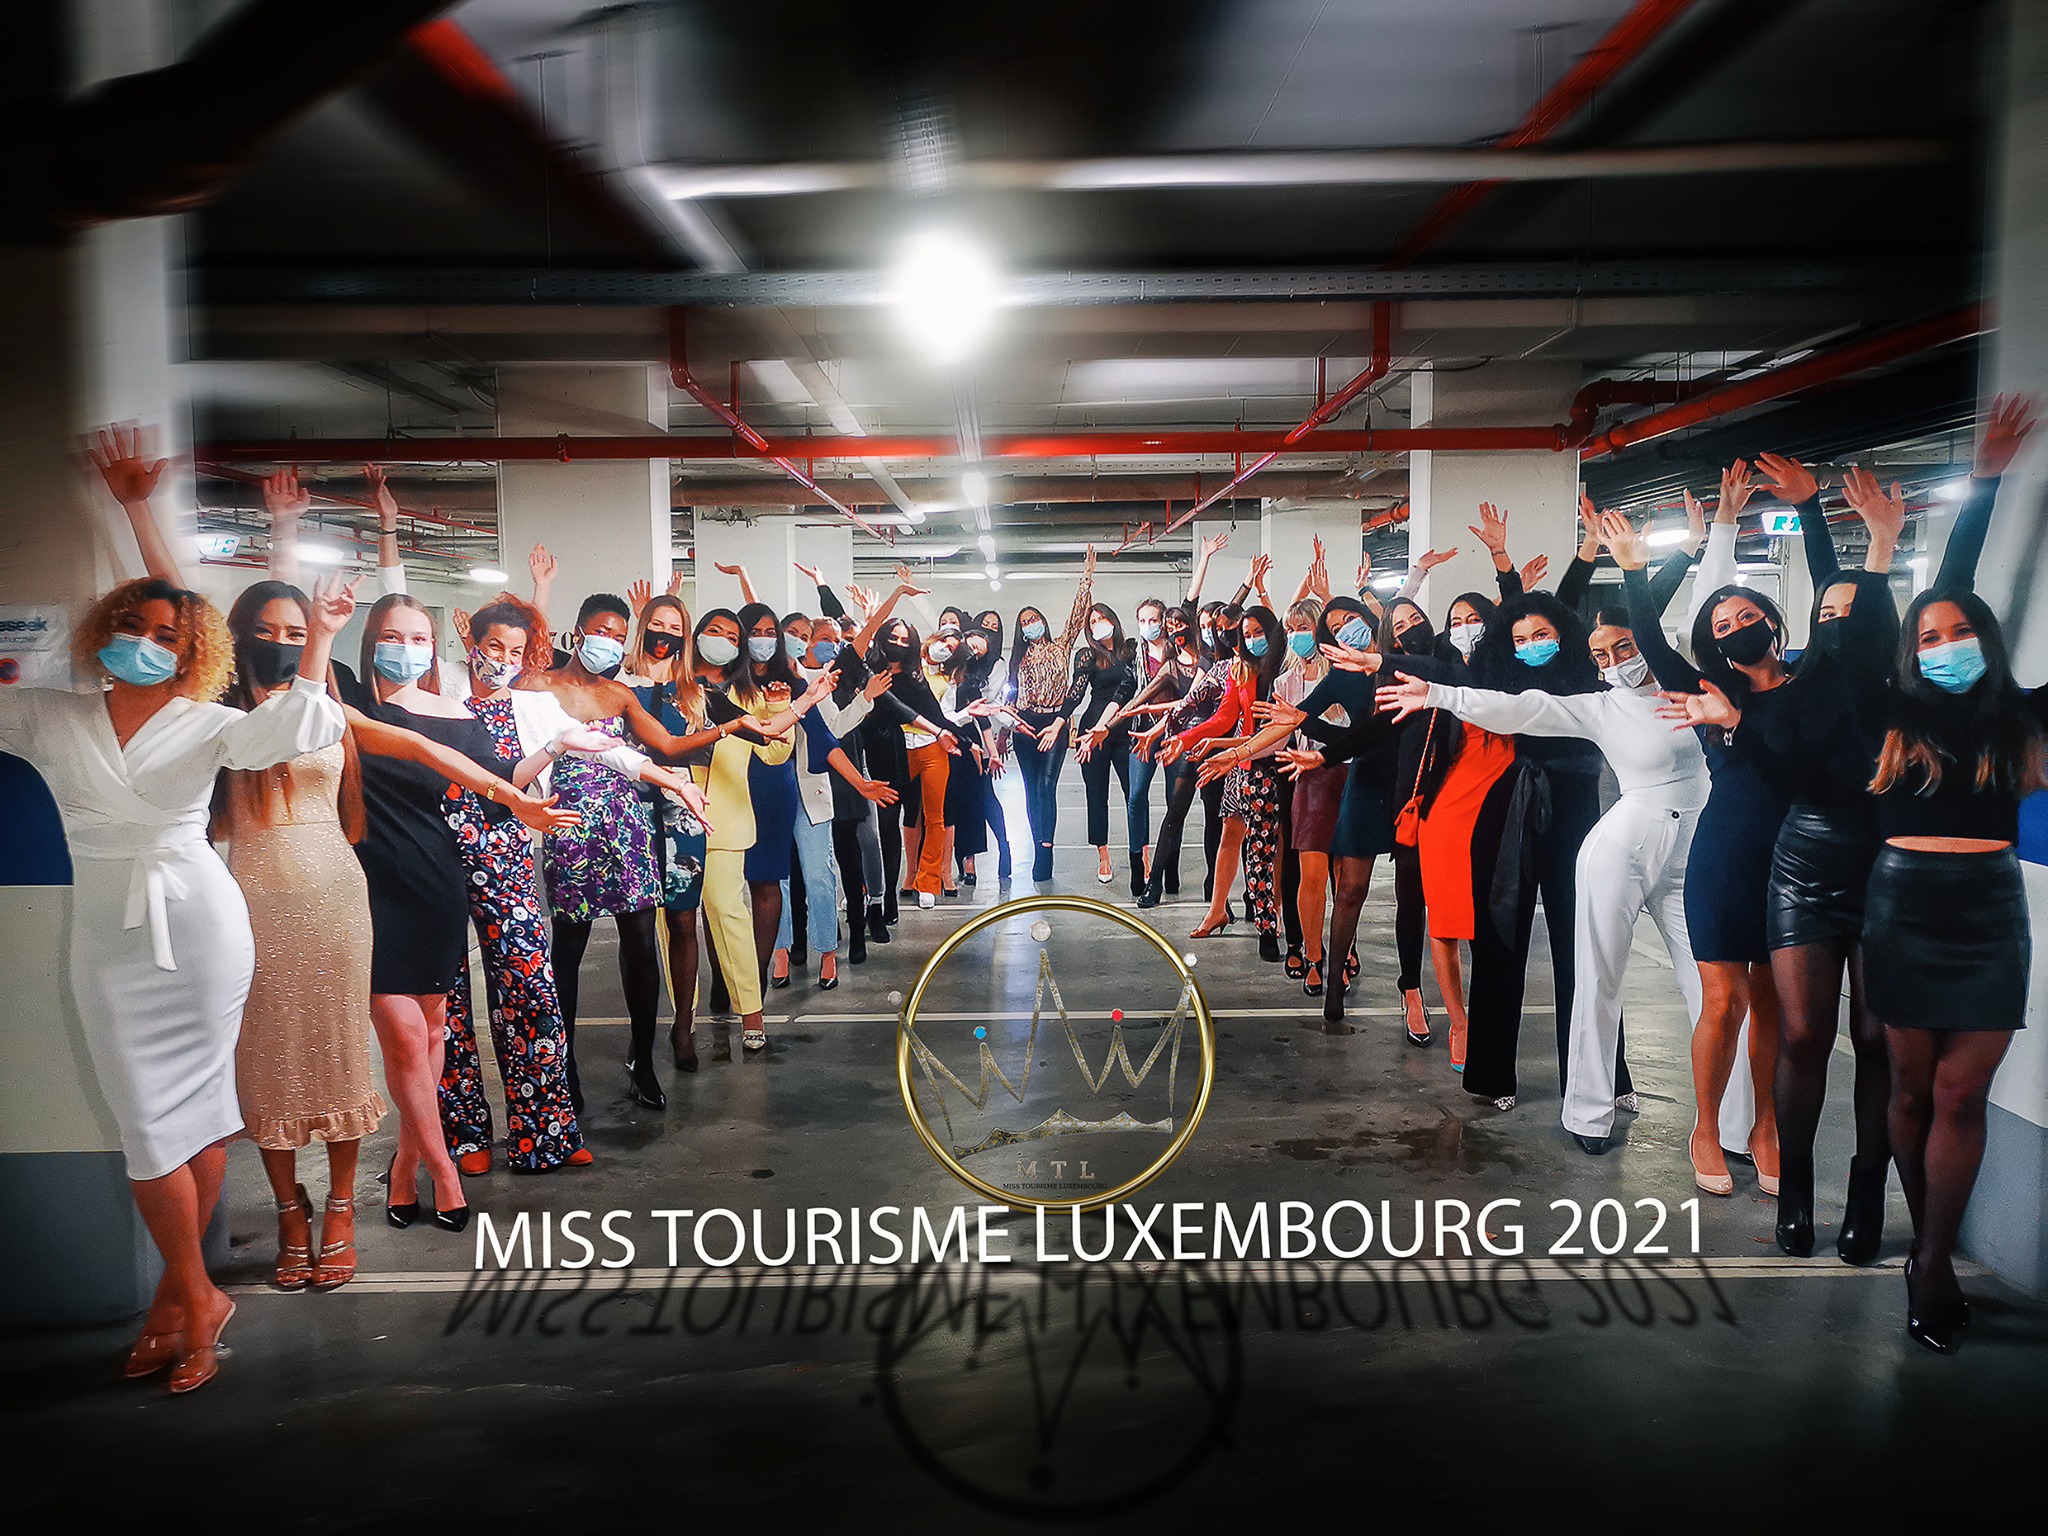 FINALE MISS TOURISME LUXEMBOURG 2021